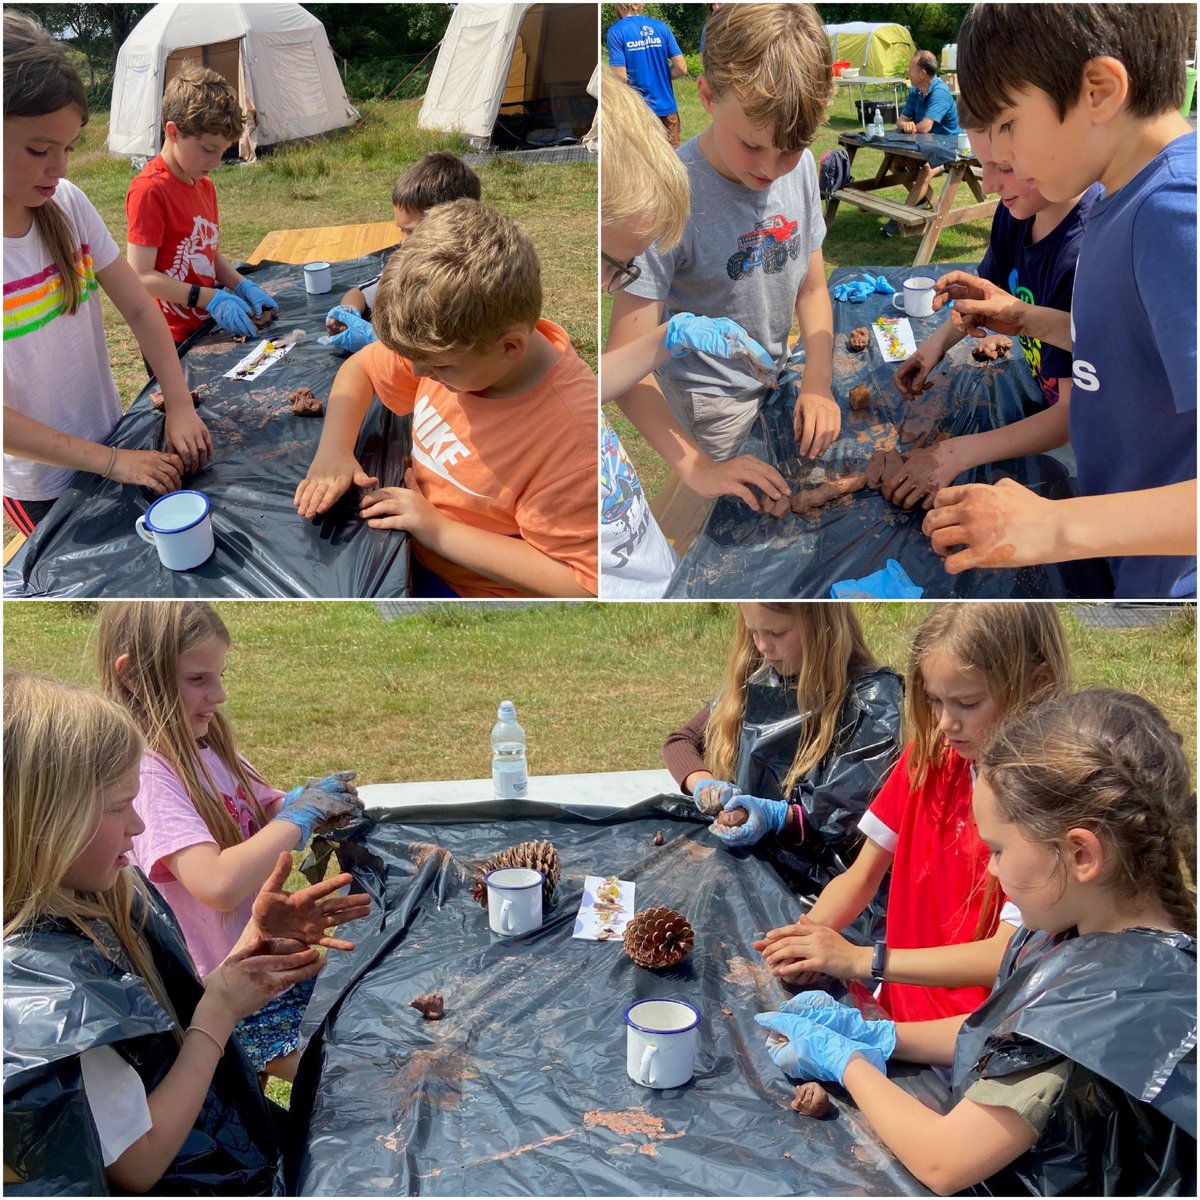 Year 5 pupils have safely arrived in Dorset after a sweet-filled drive. They settled into their tents, enjoyed lunch, and tackled their first group clay challenge. With amazing weather and an awesome campsite, the adventure is just beginning! #Year5DorsetTrip #Year5Residential